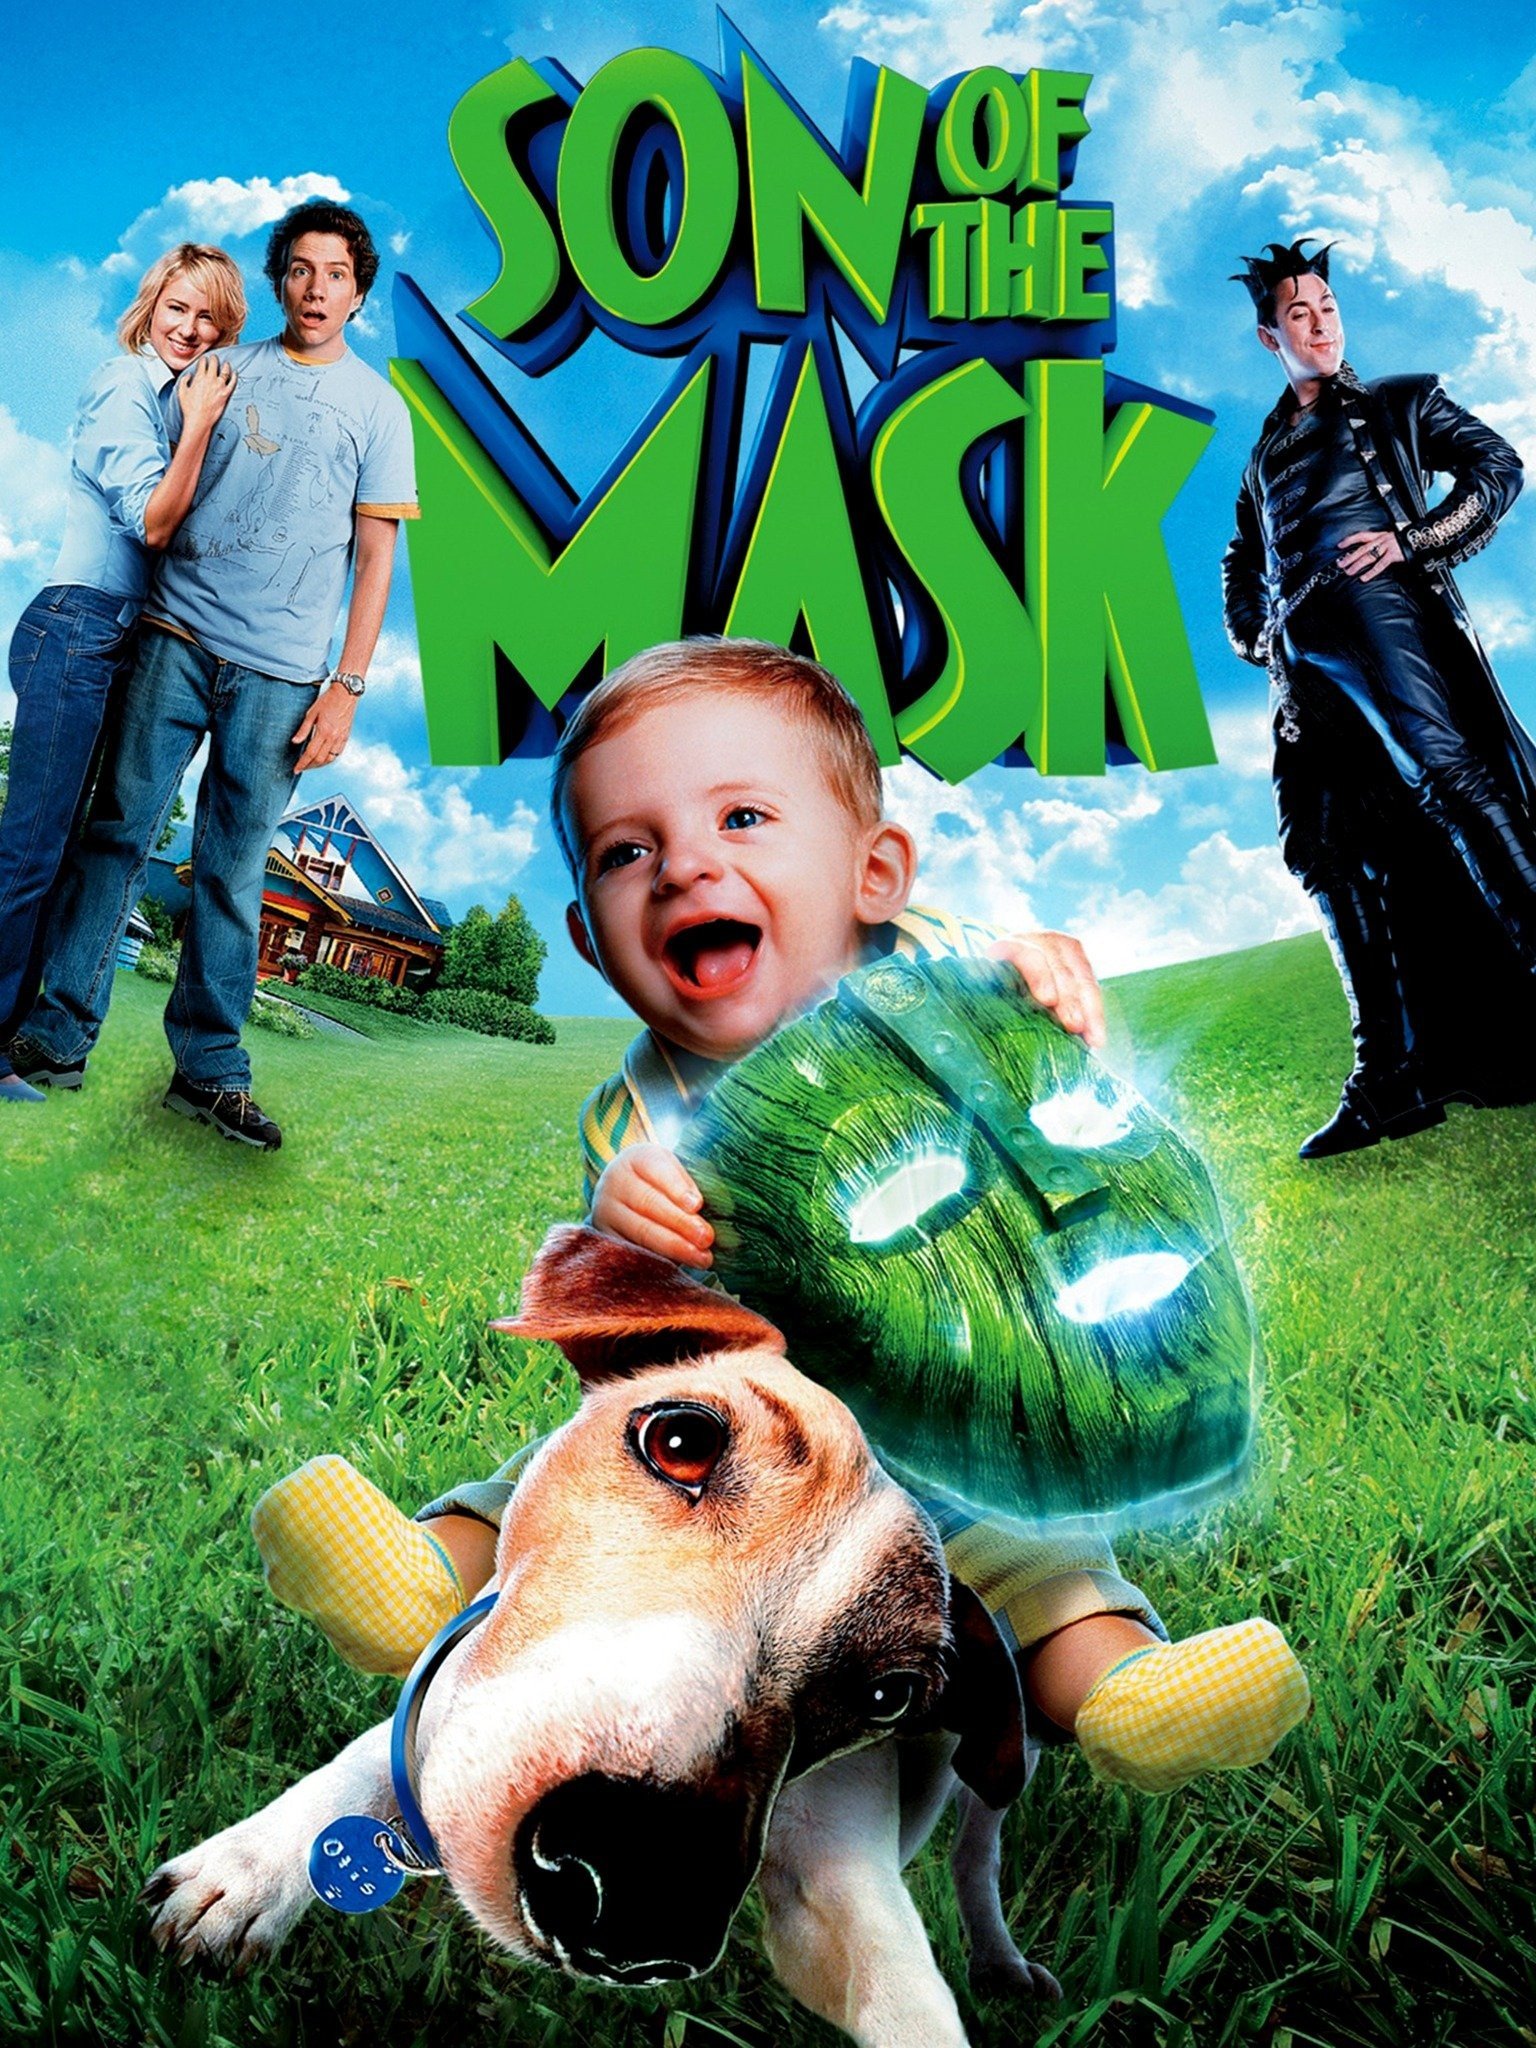 Son of the Mask - Kevo